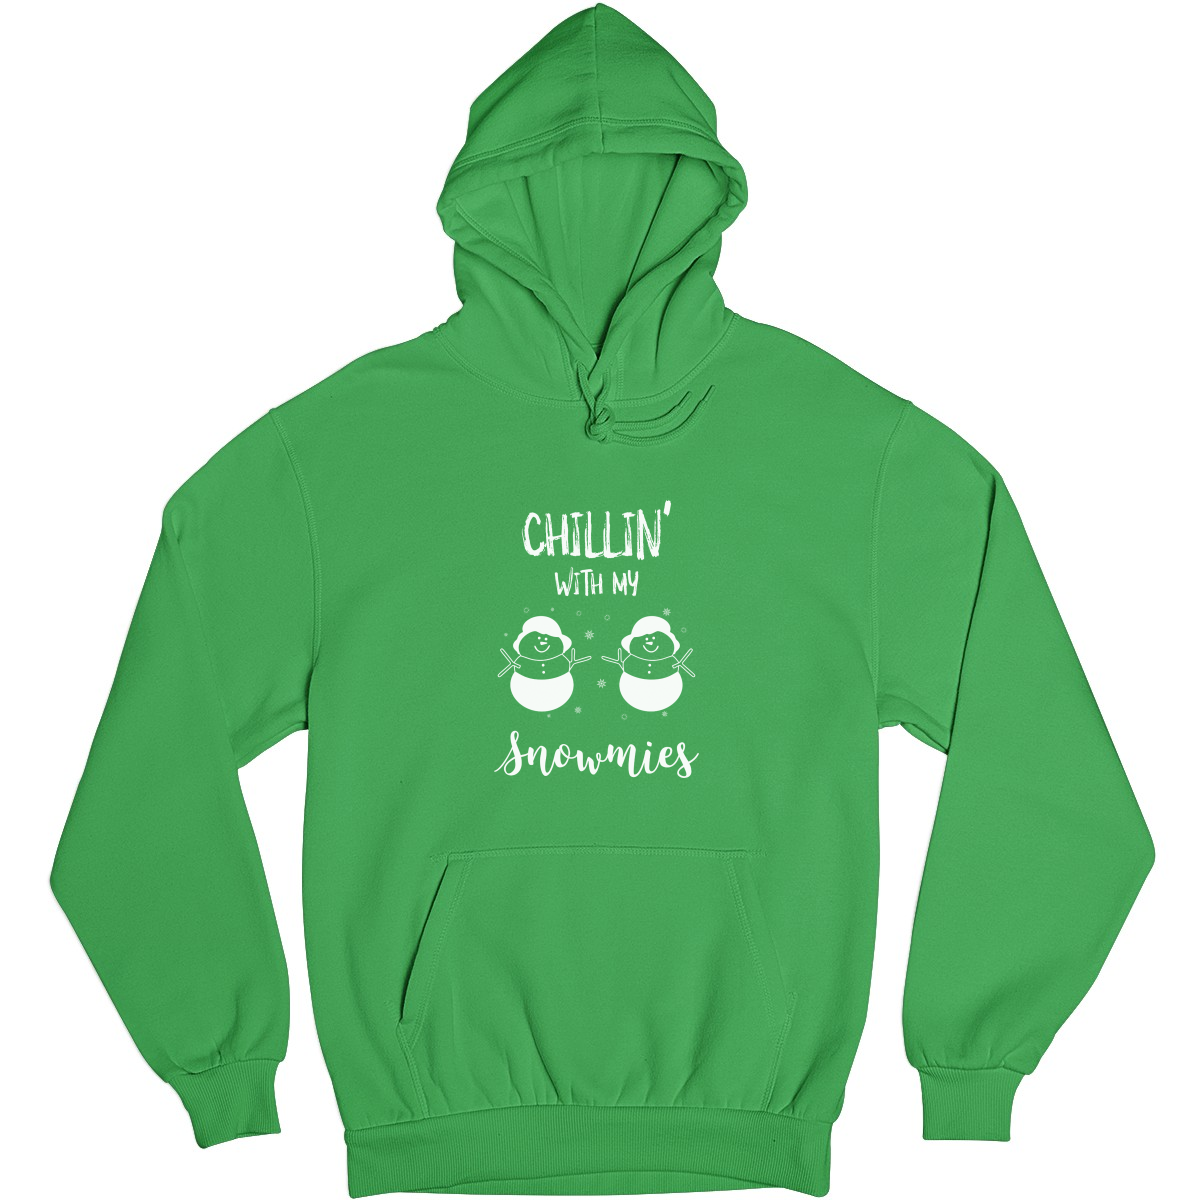 Chillin' With My Snowmies Unisex Hoodie | Green